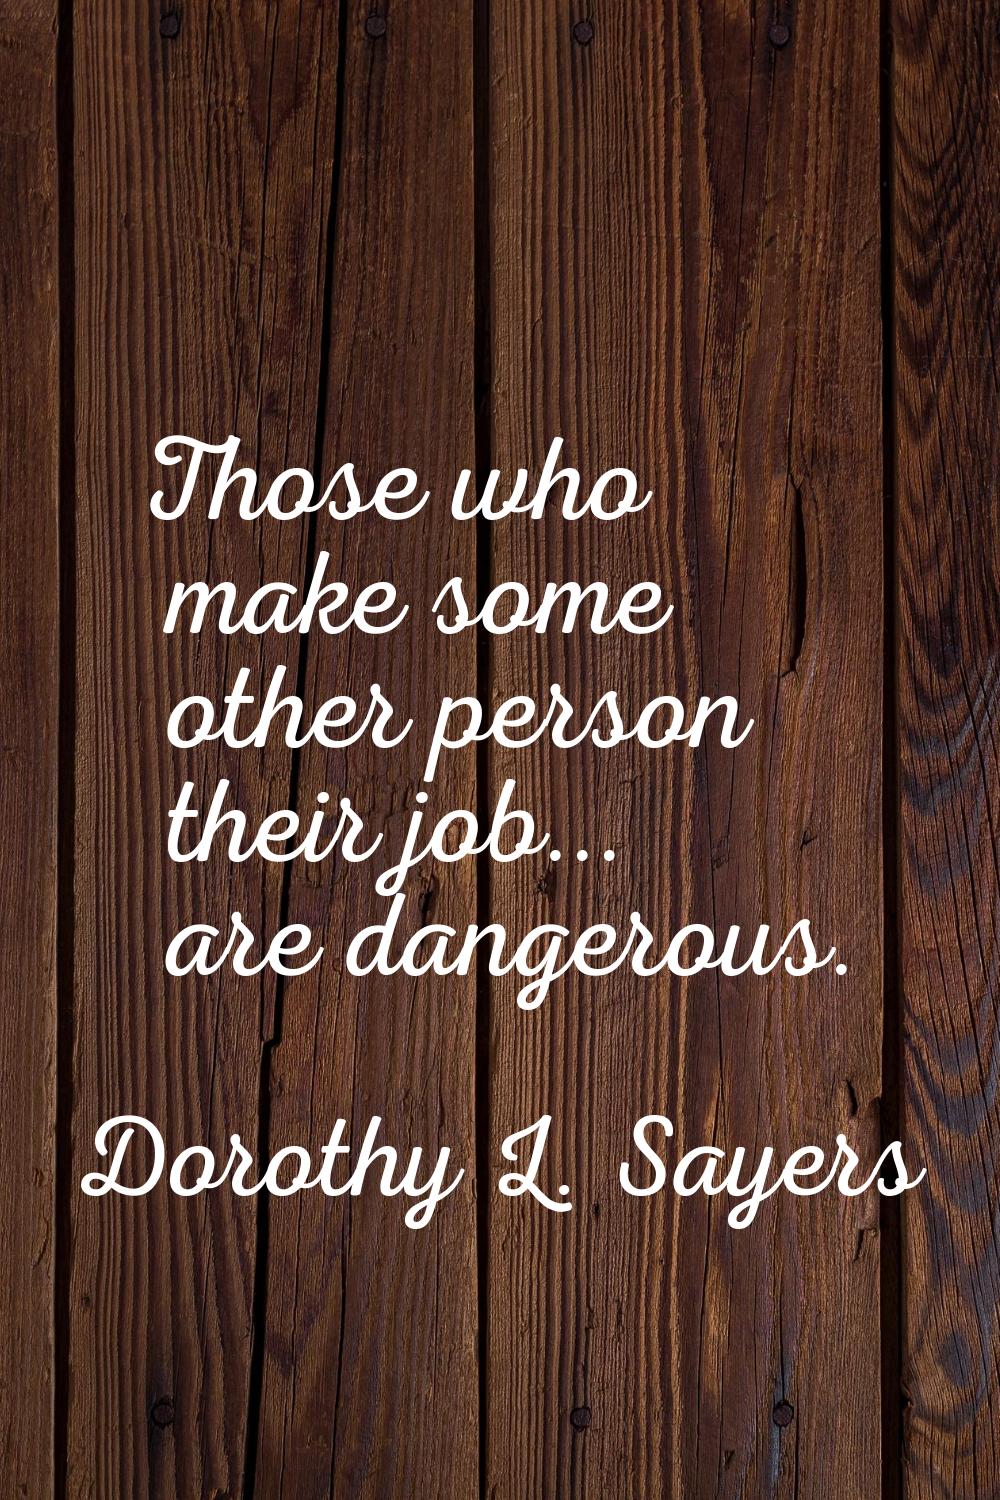 Those who make some other person their job... are dangerous.